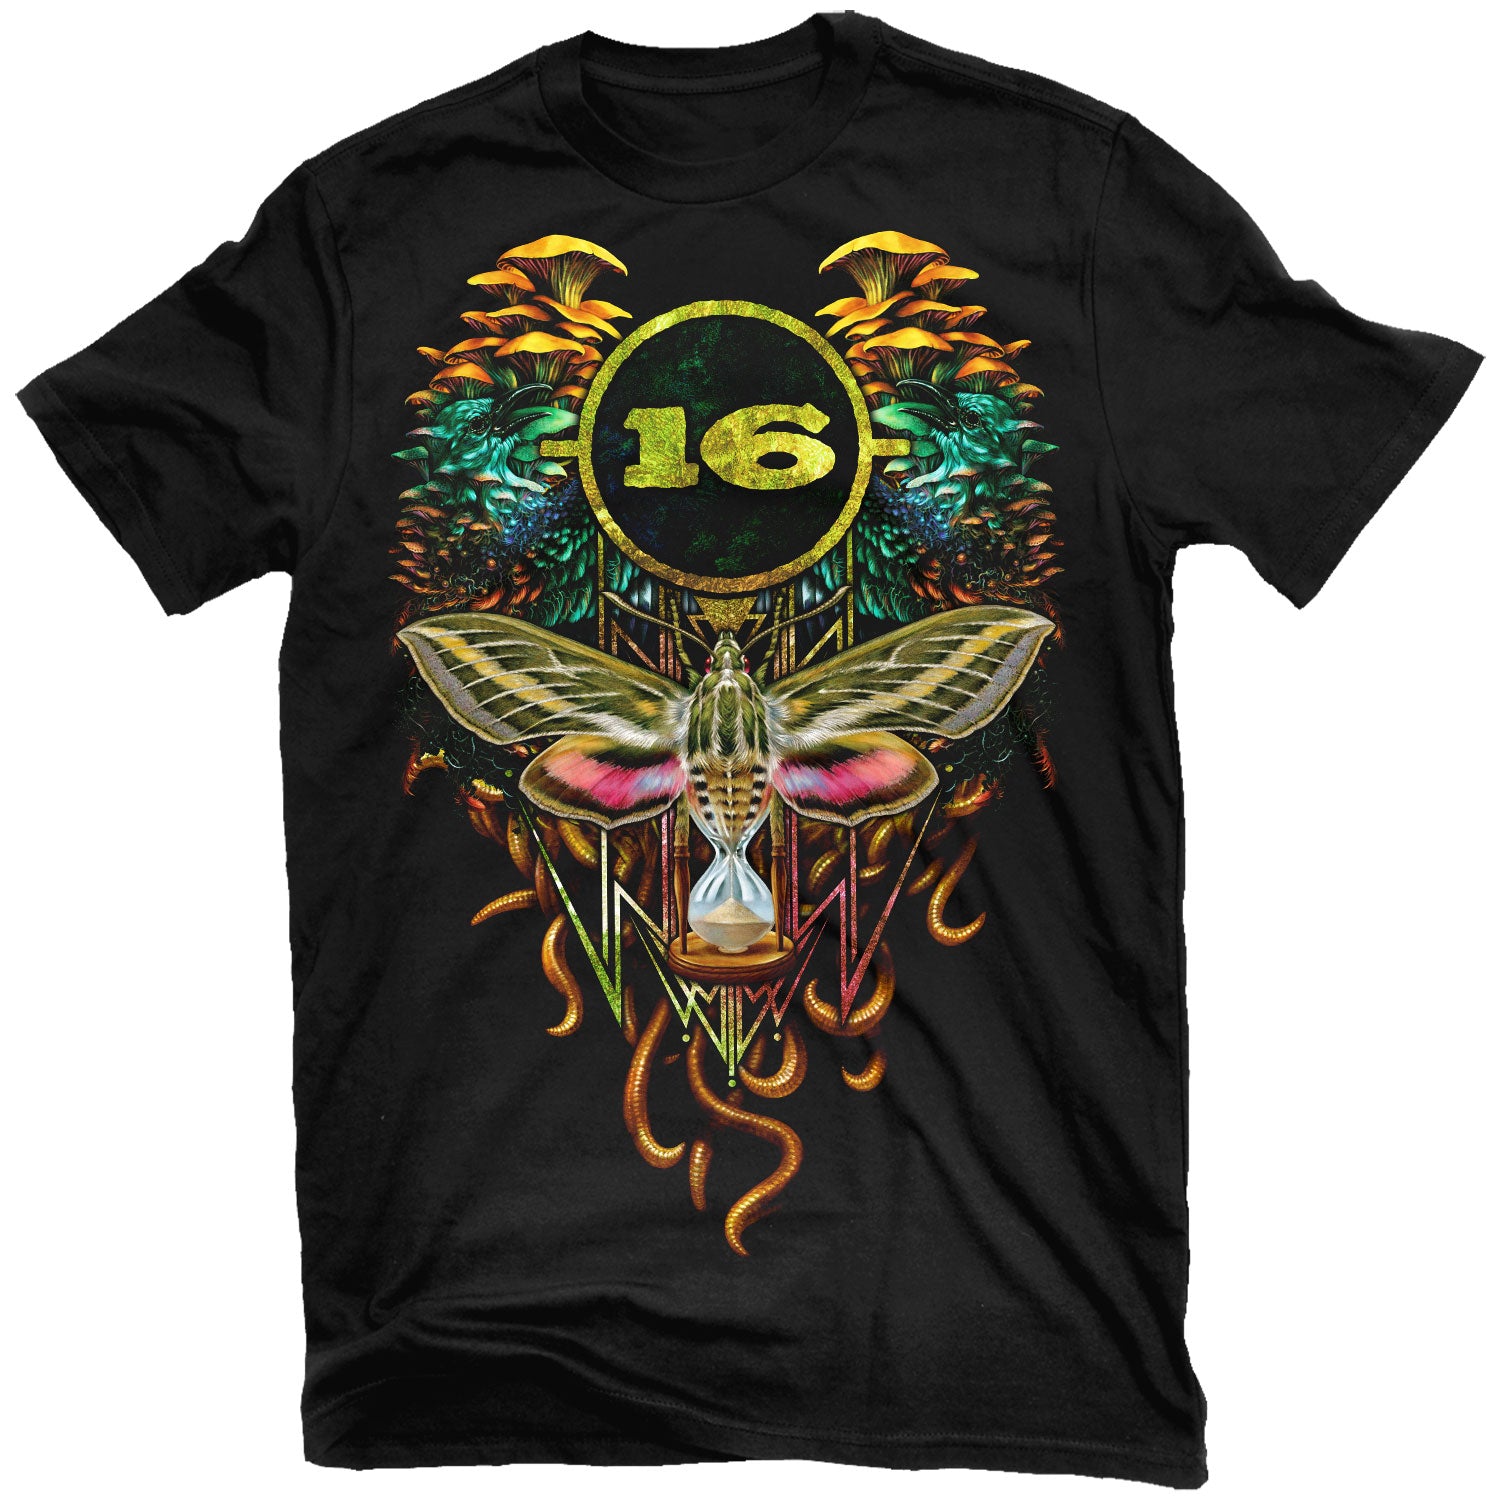 16 "Into Dust" T-Shirt